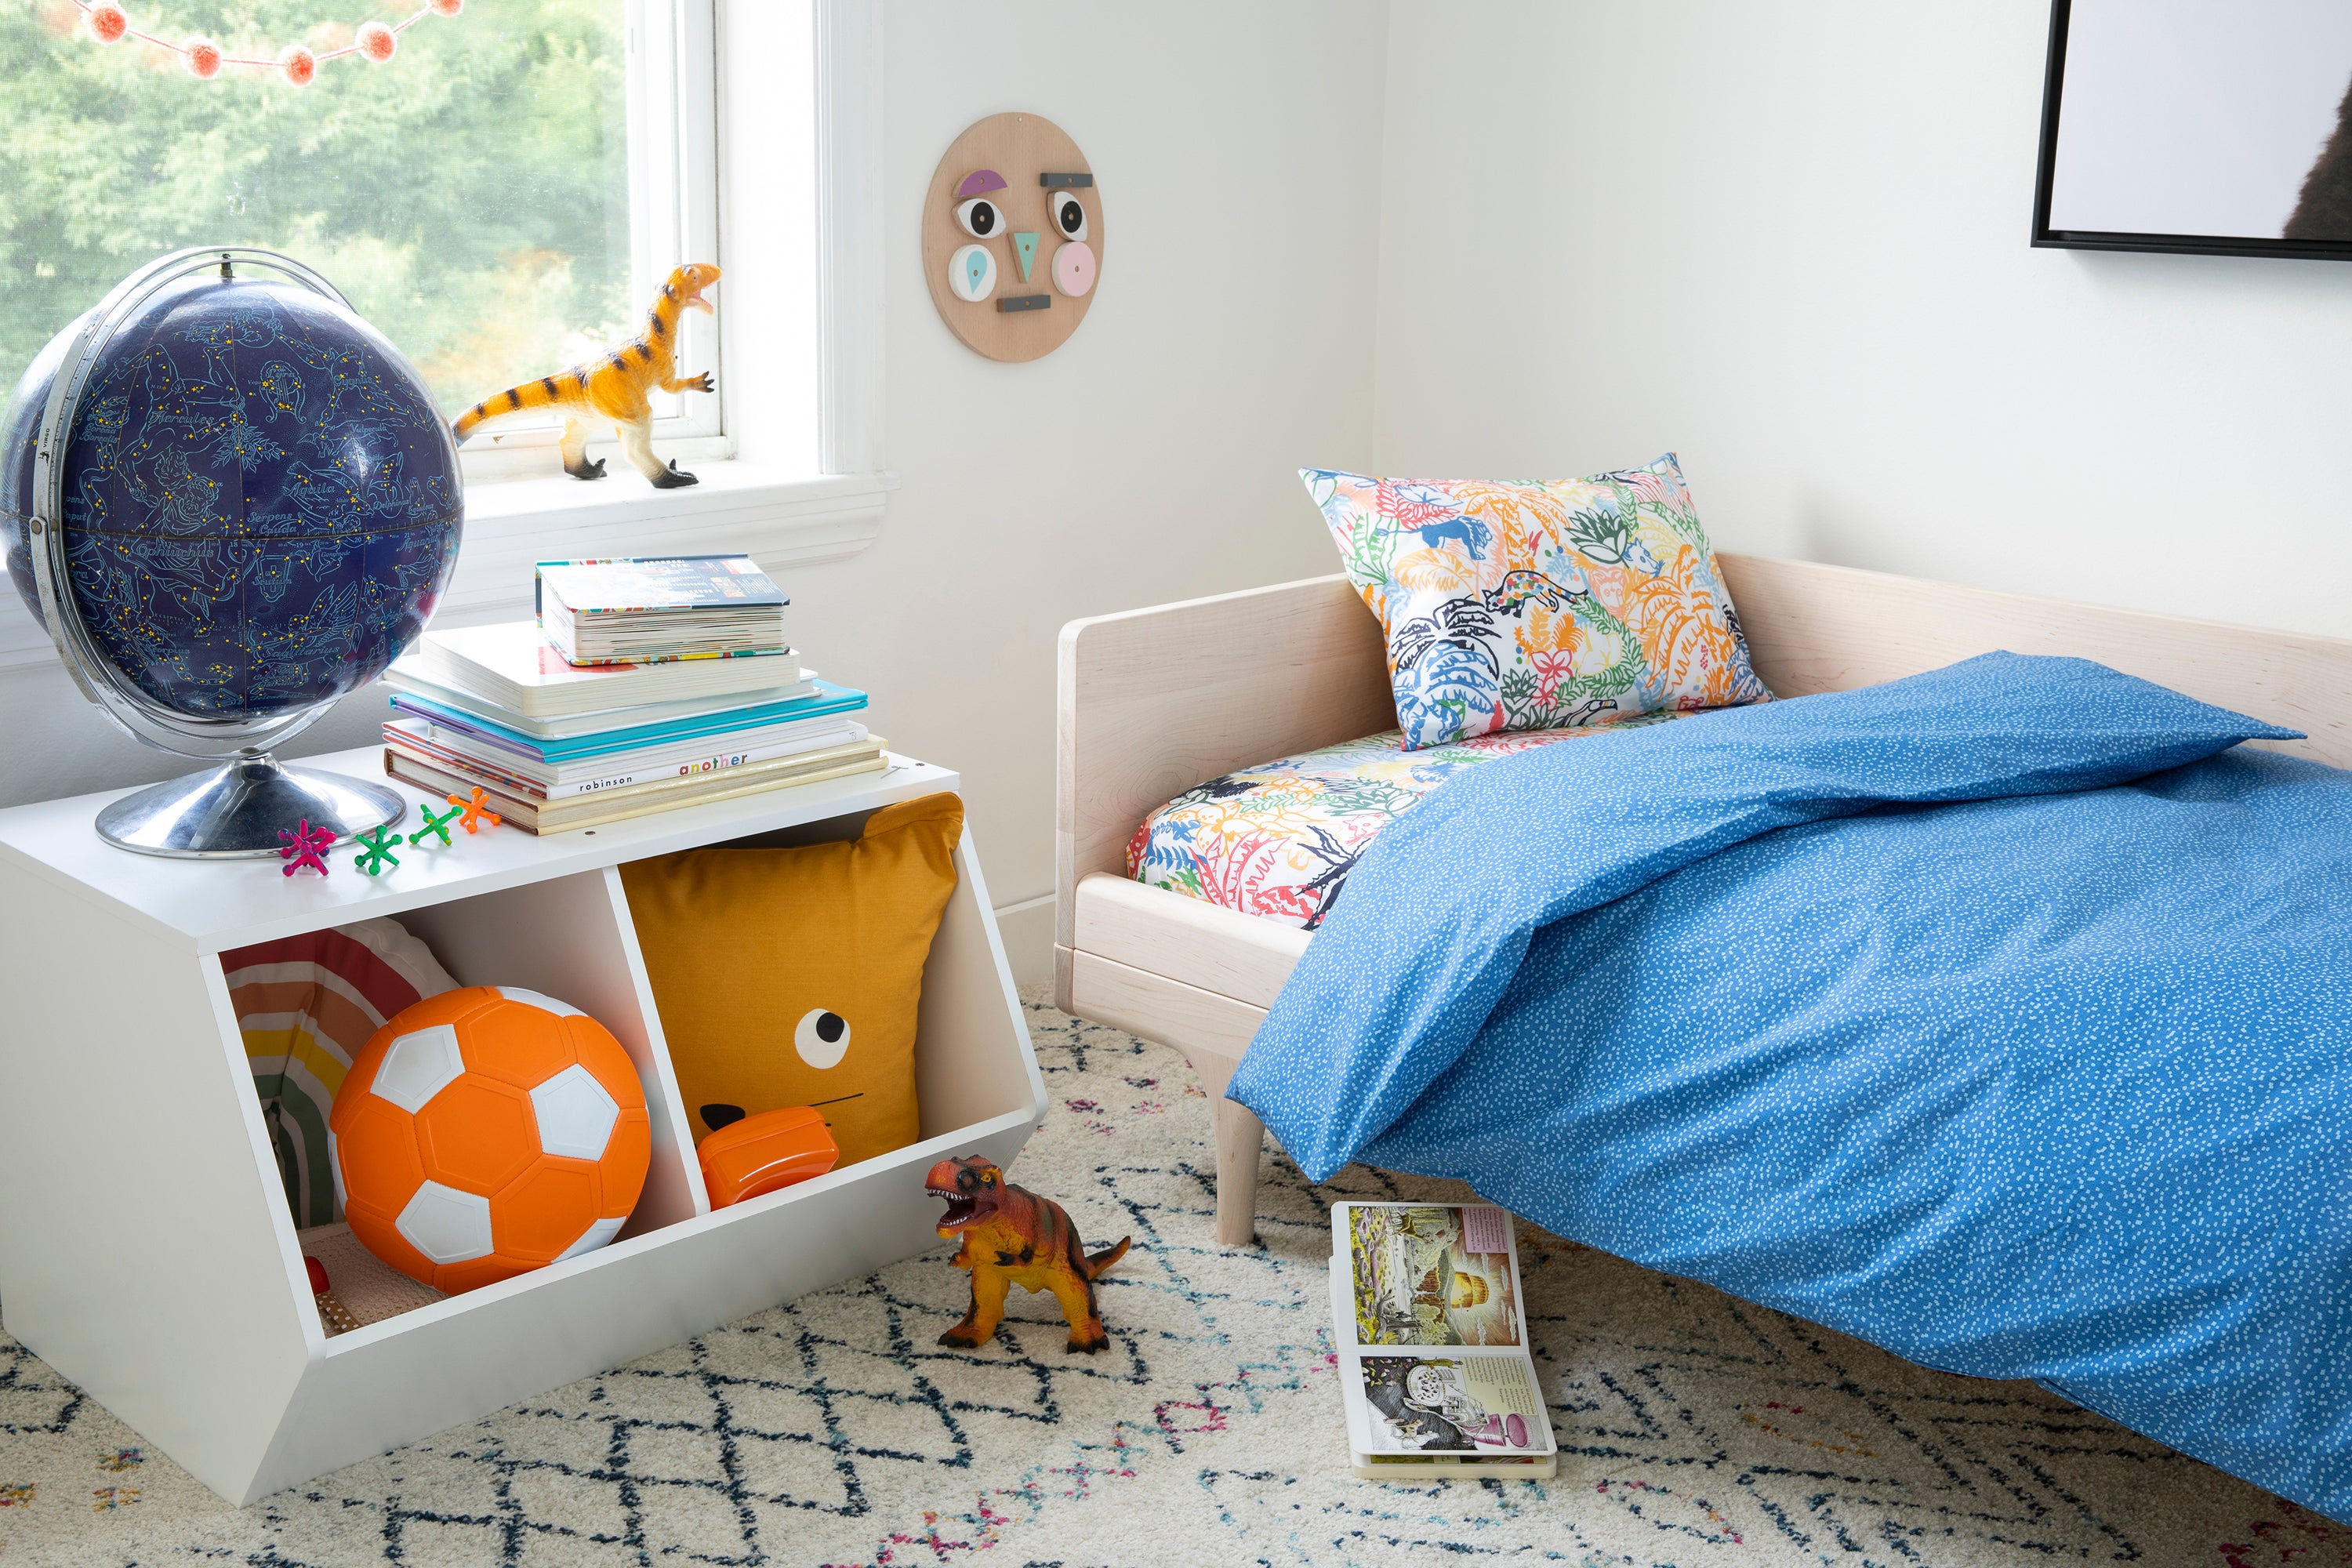 Brooklinen's Toddler Sheet Set in "Jungle in Multi" paired with the Duvet Cover in "Dotty in Blue."